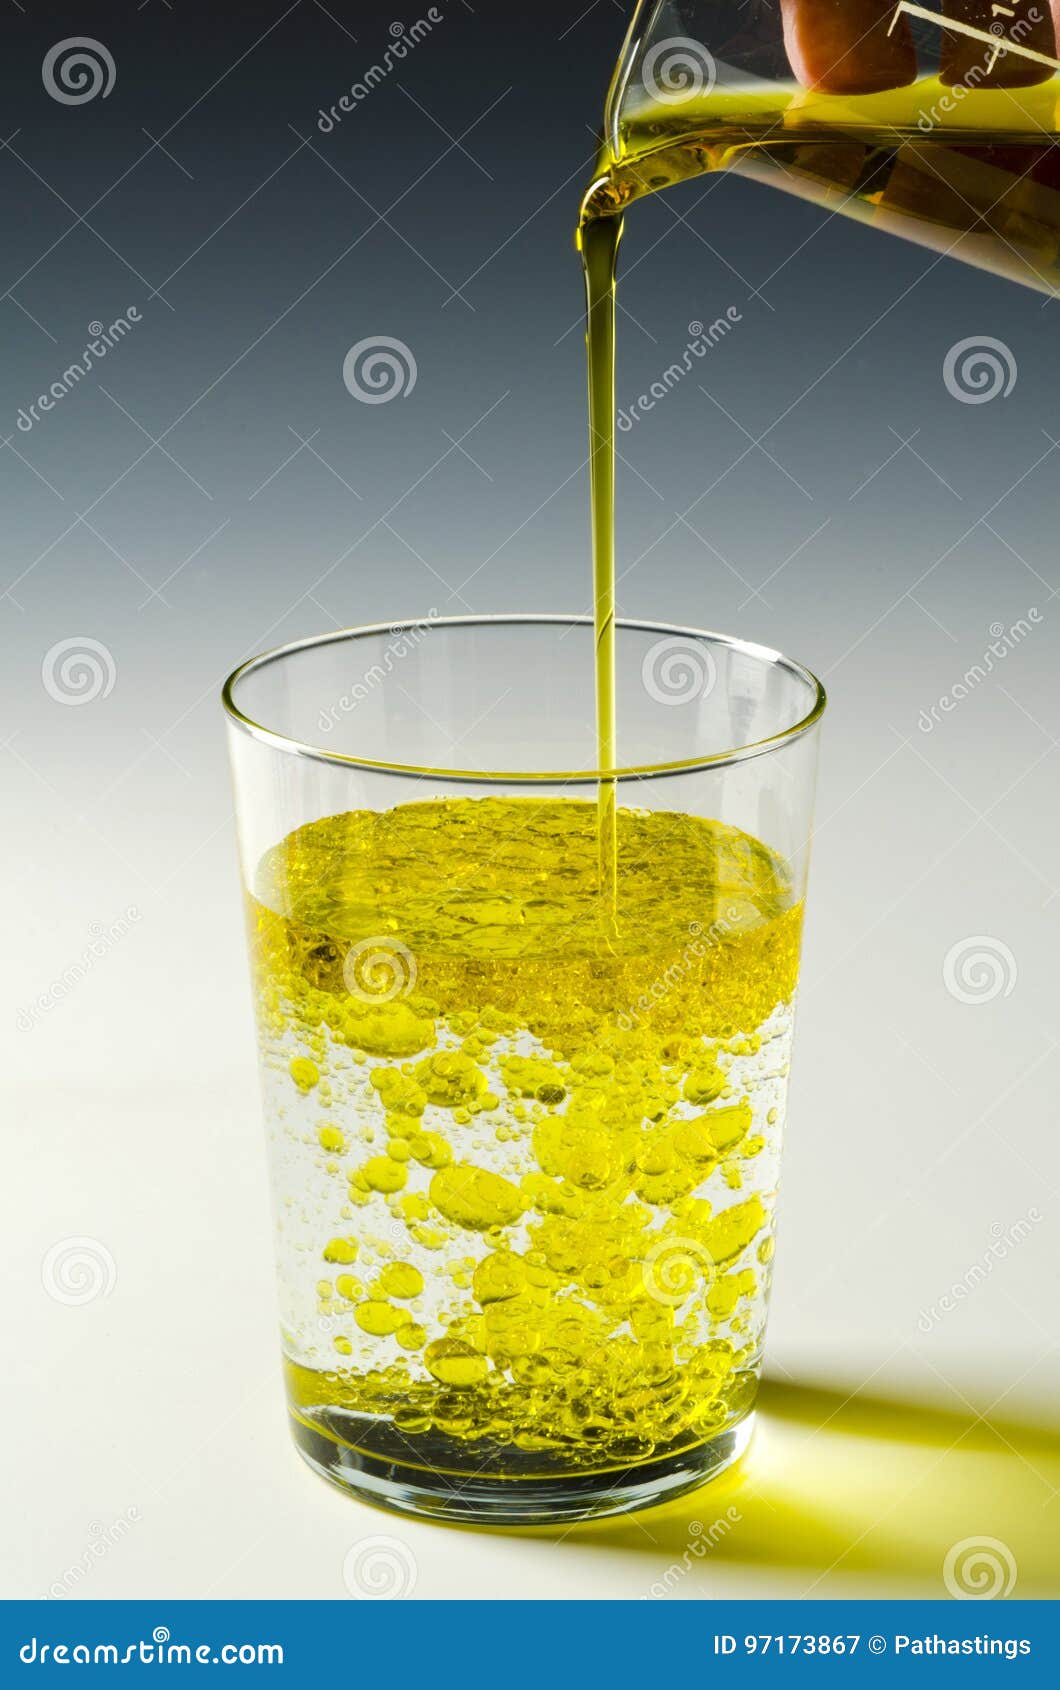 physics. immiscible fluids, oil and water. 3 of 4 image series.